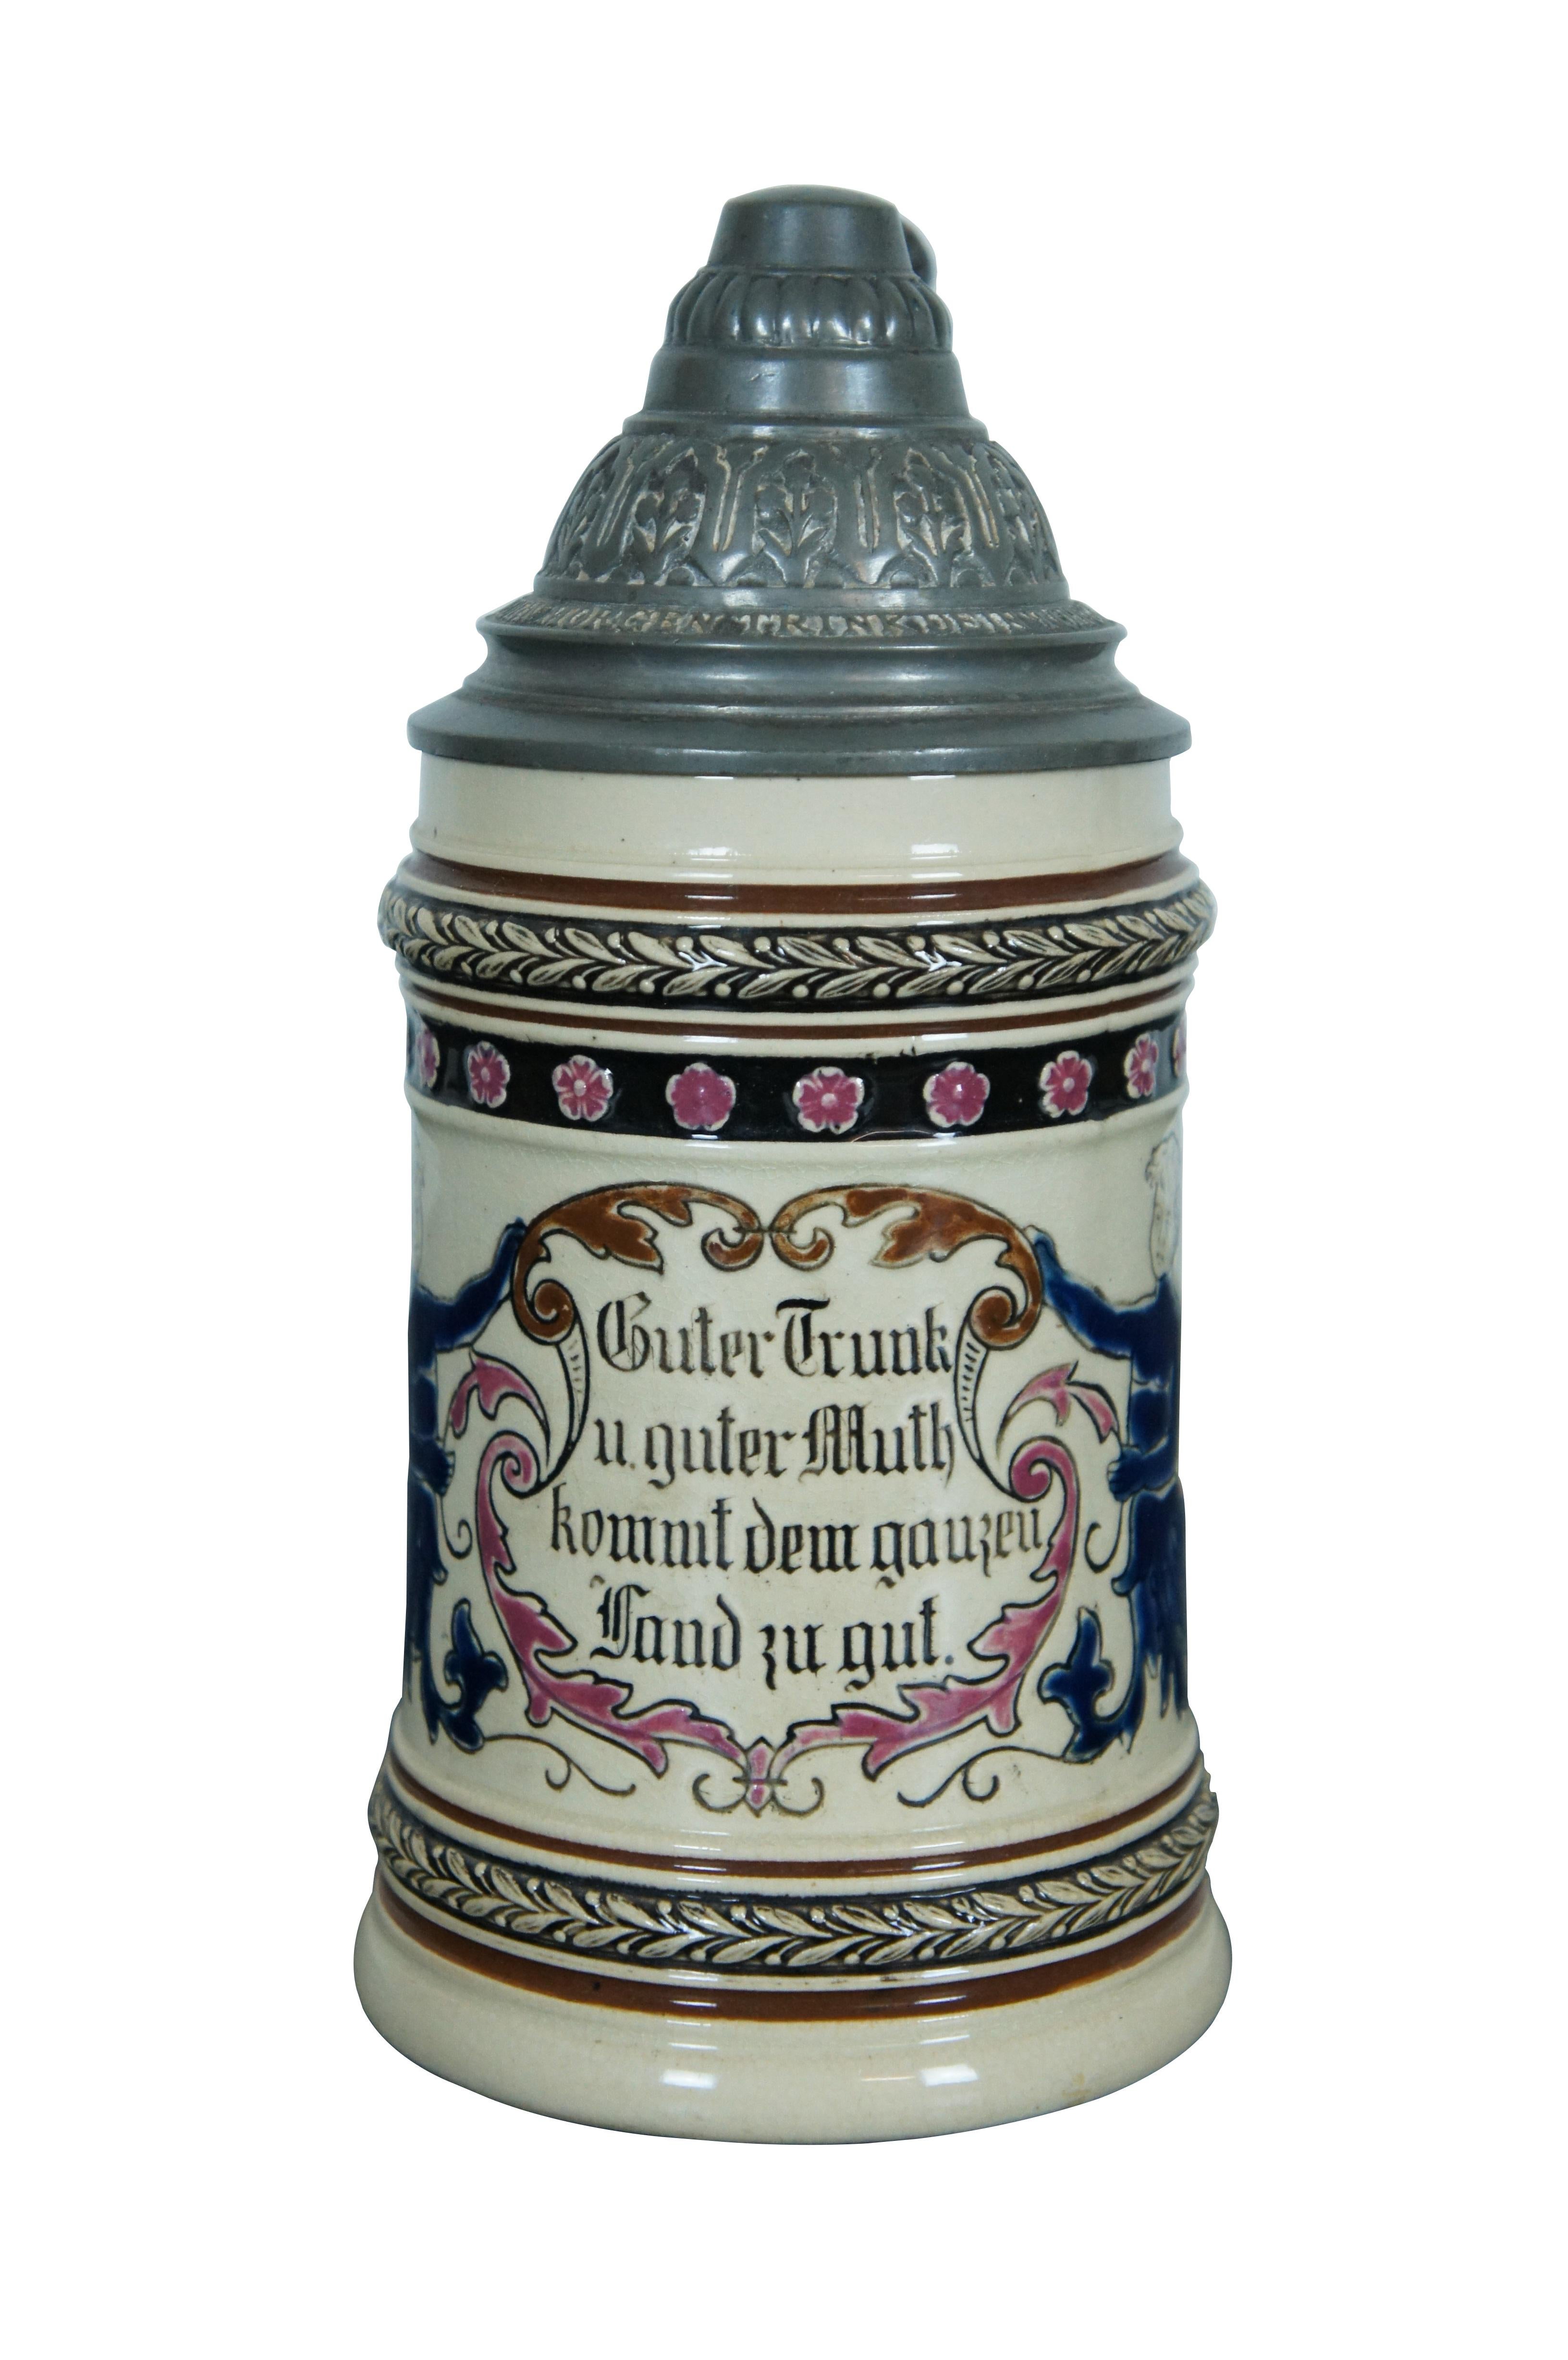 Antique German 1/2 liter stein / mug or tankard featuring a pair of cobalt blue boys with floral and acanthus swags with the phrase 